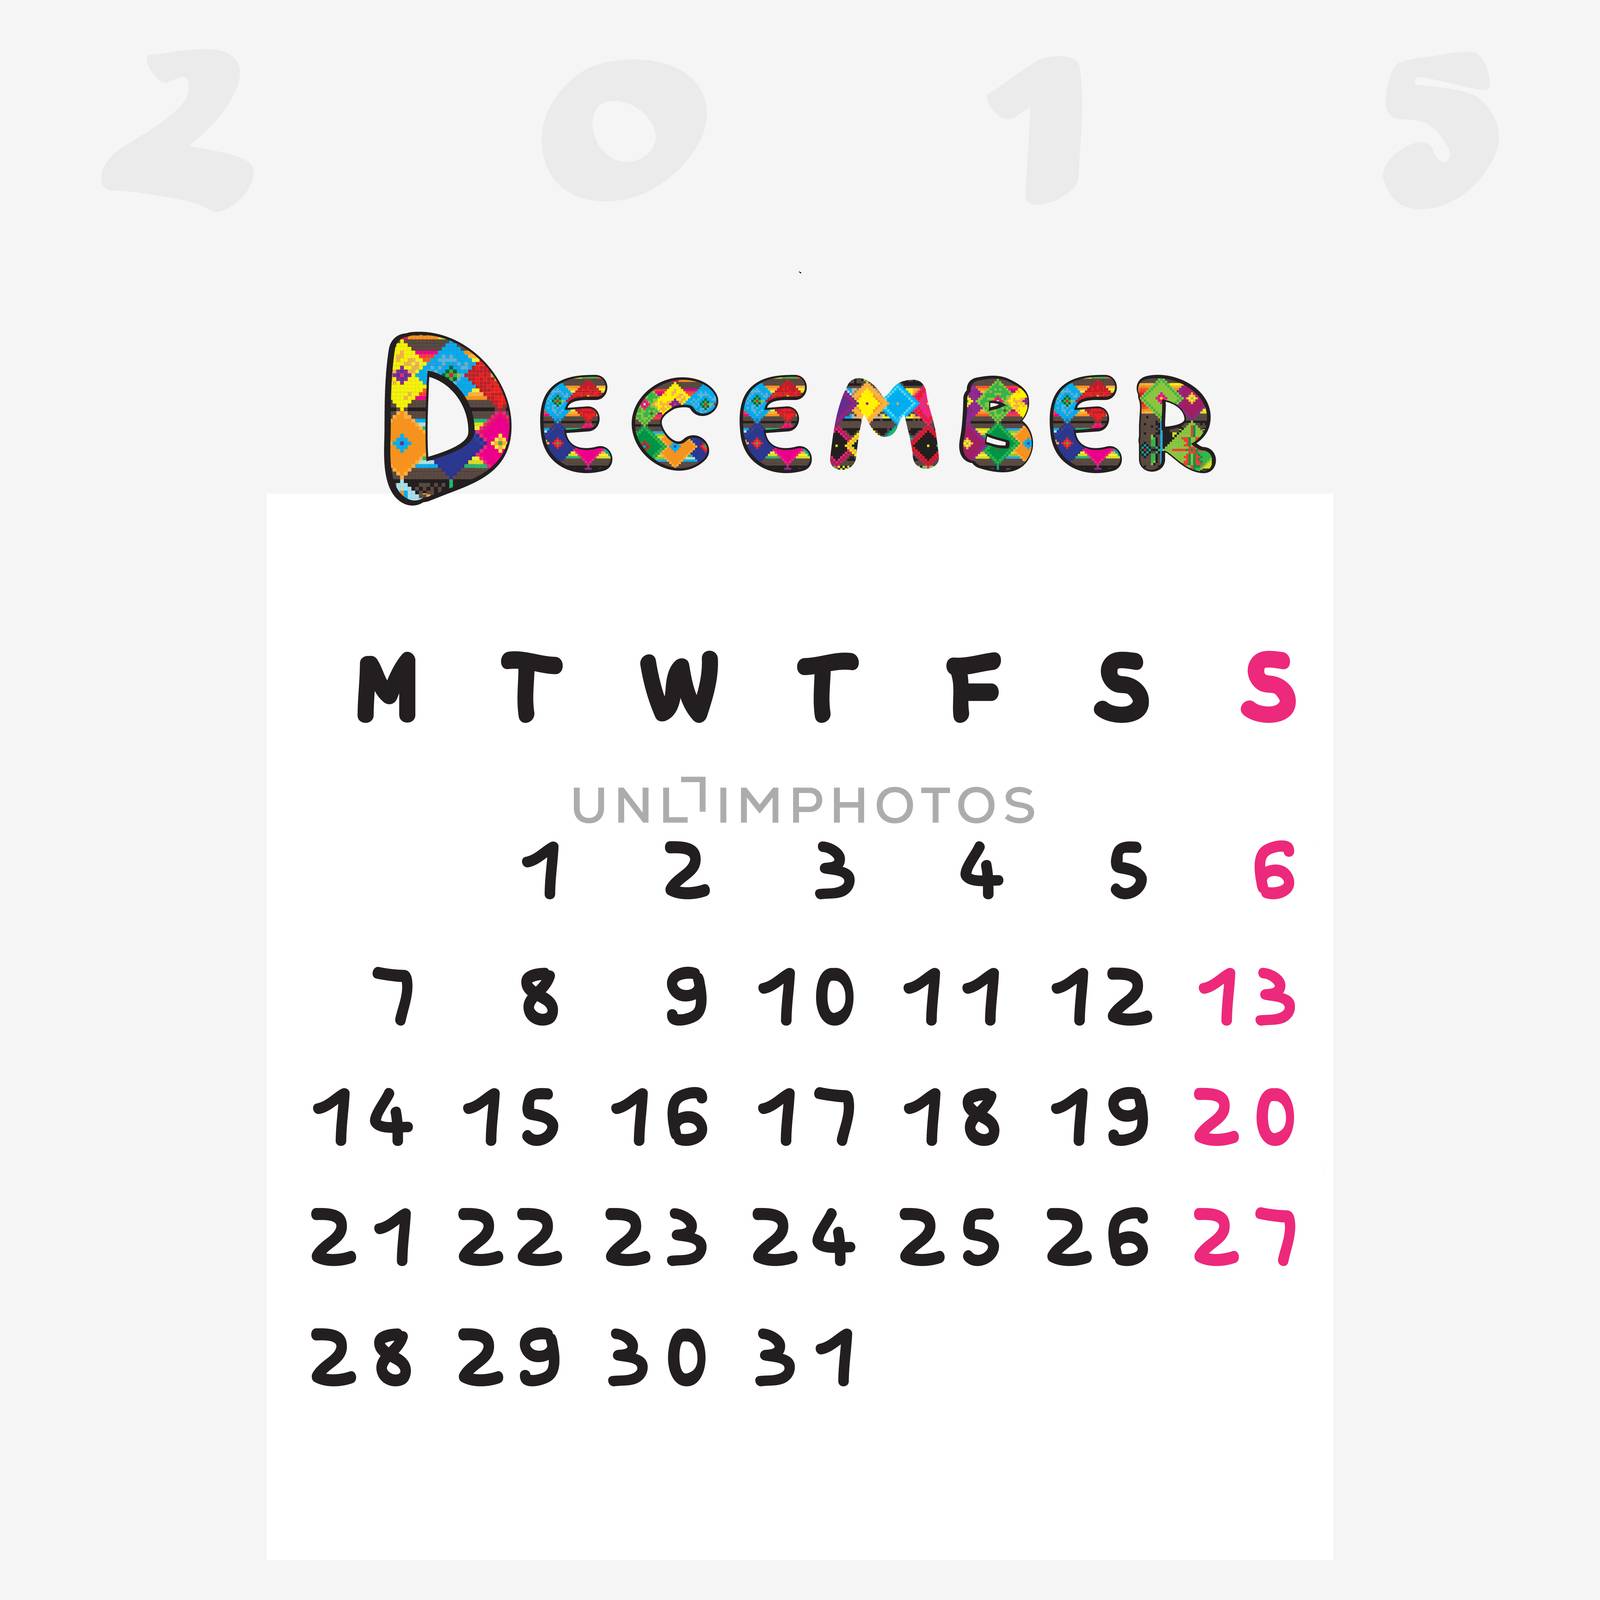 Calendar 2015, graphic illustration of December monthly calendar with original hand drawn text and colored capital letters for kids